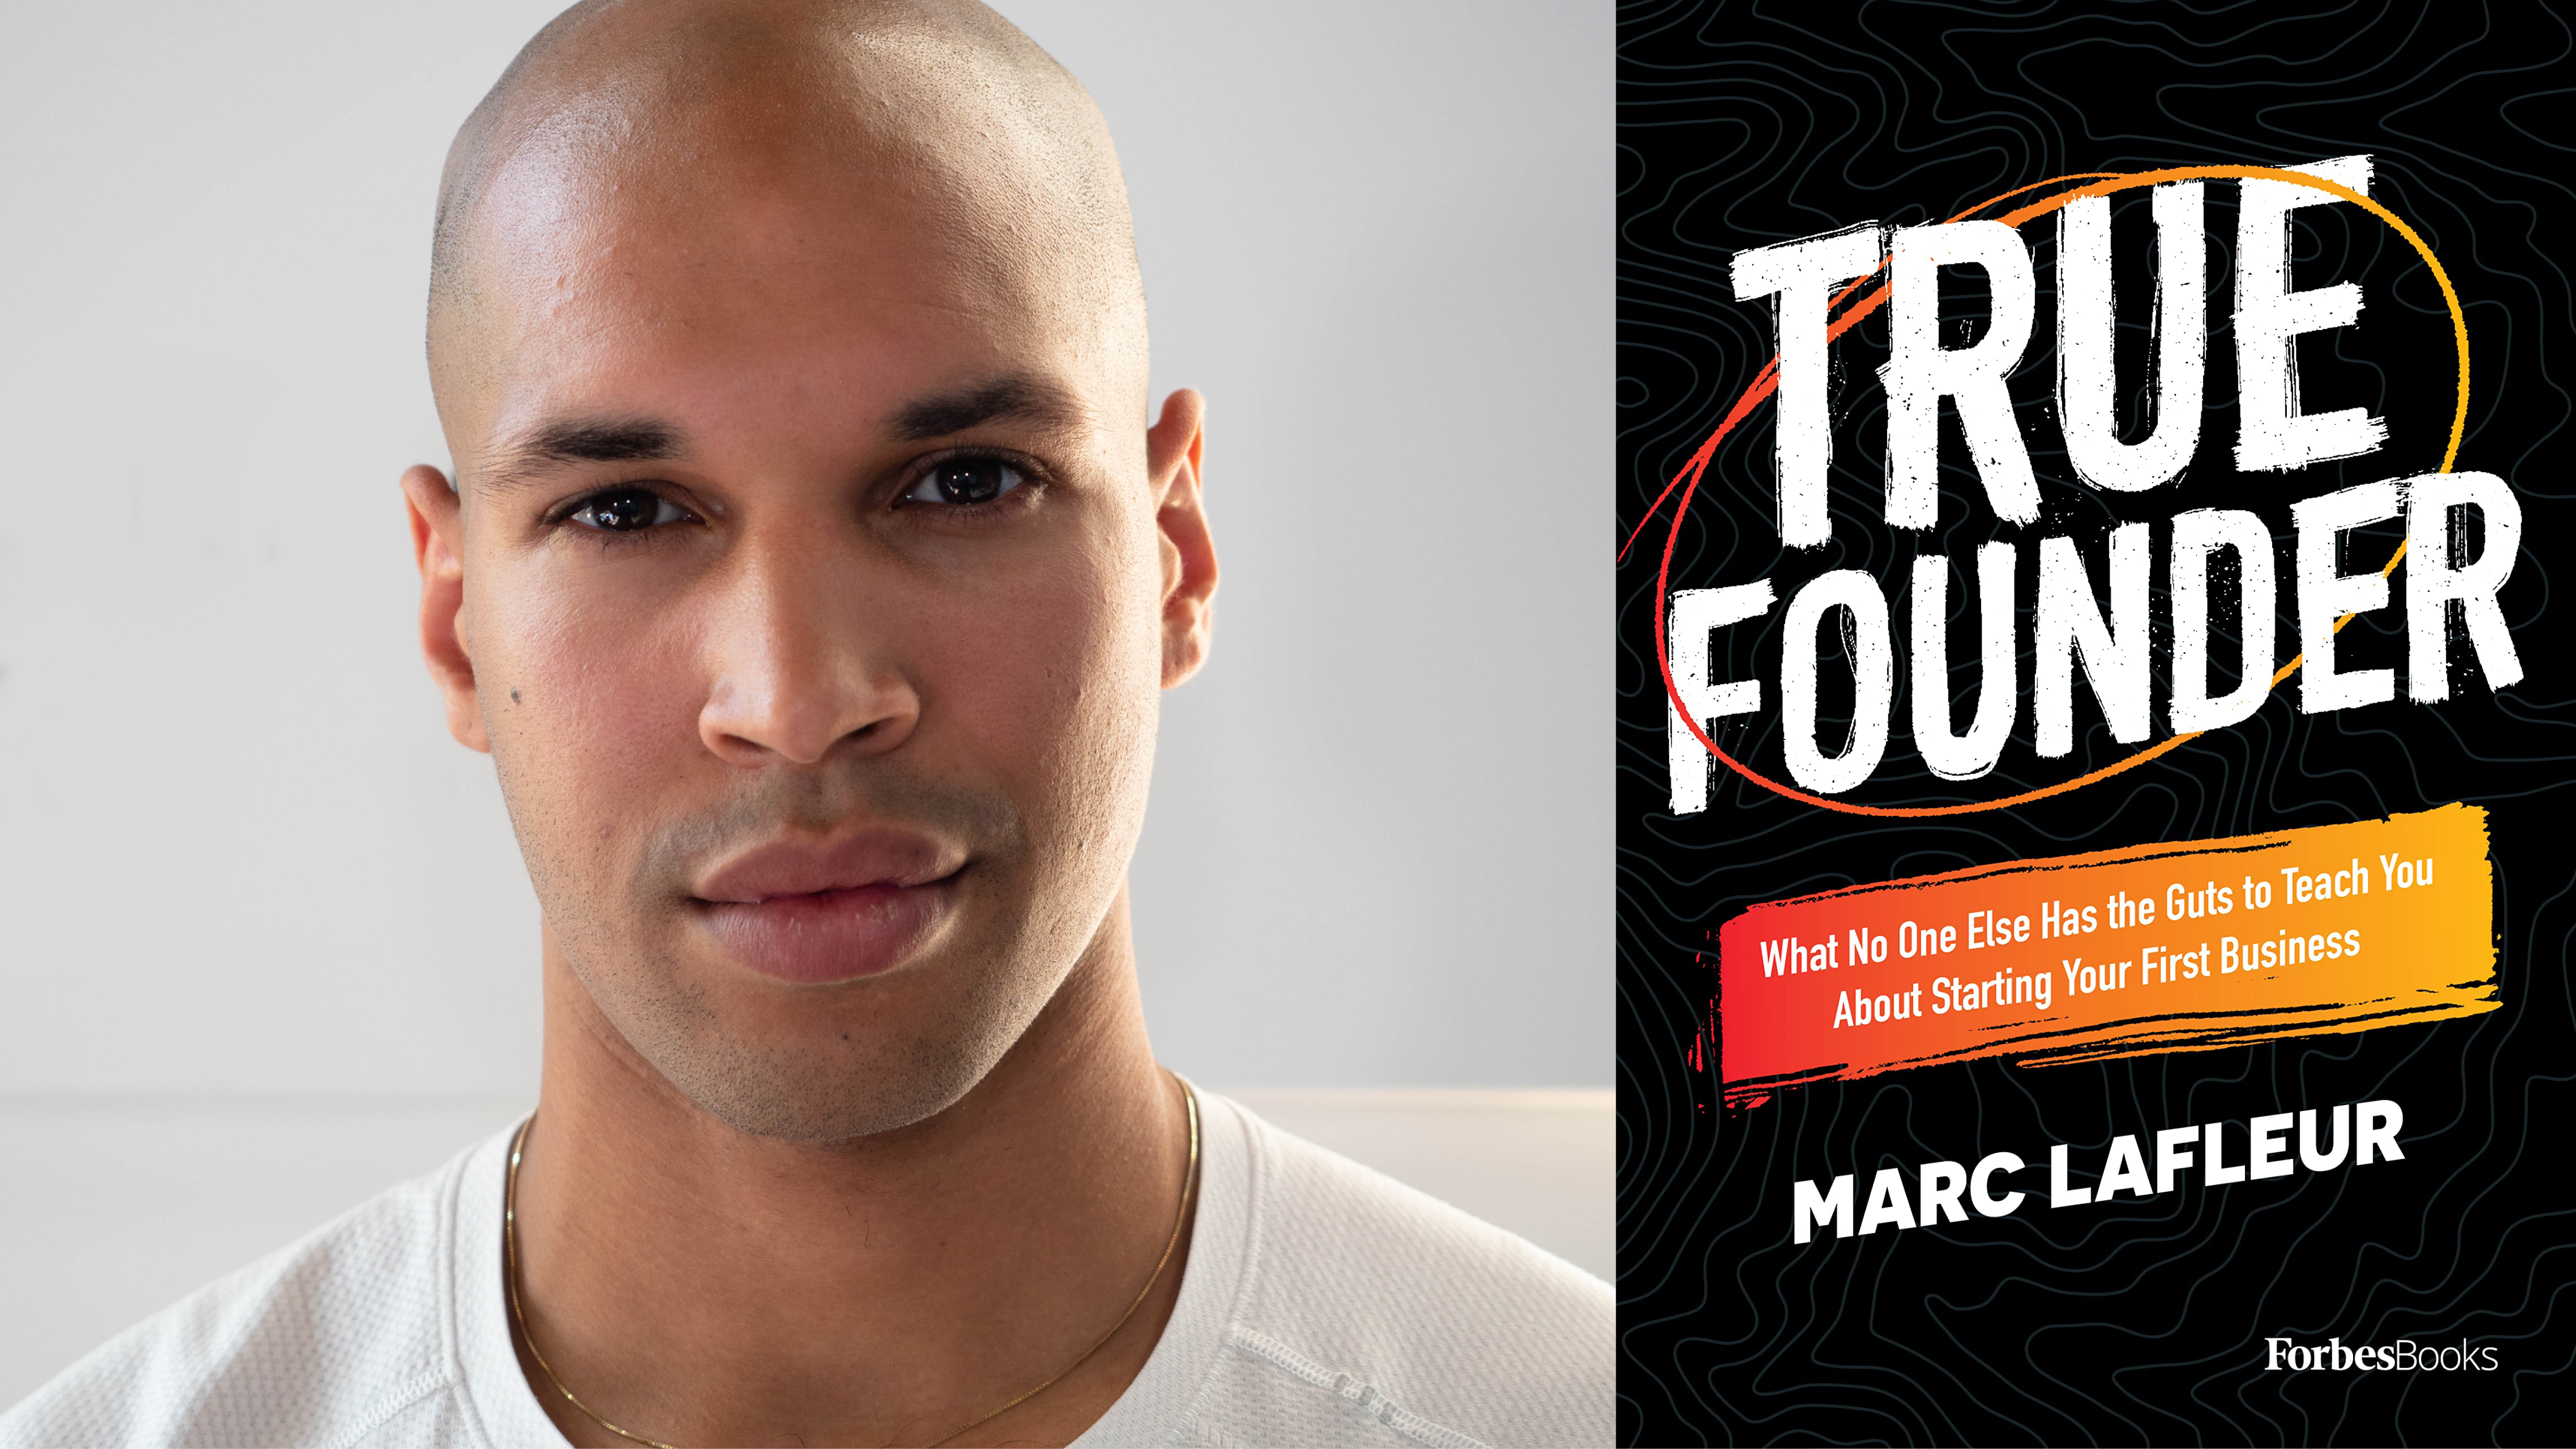 Marc Lafleur and his new book, True Founder